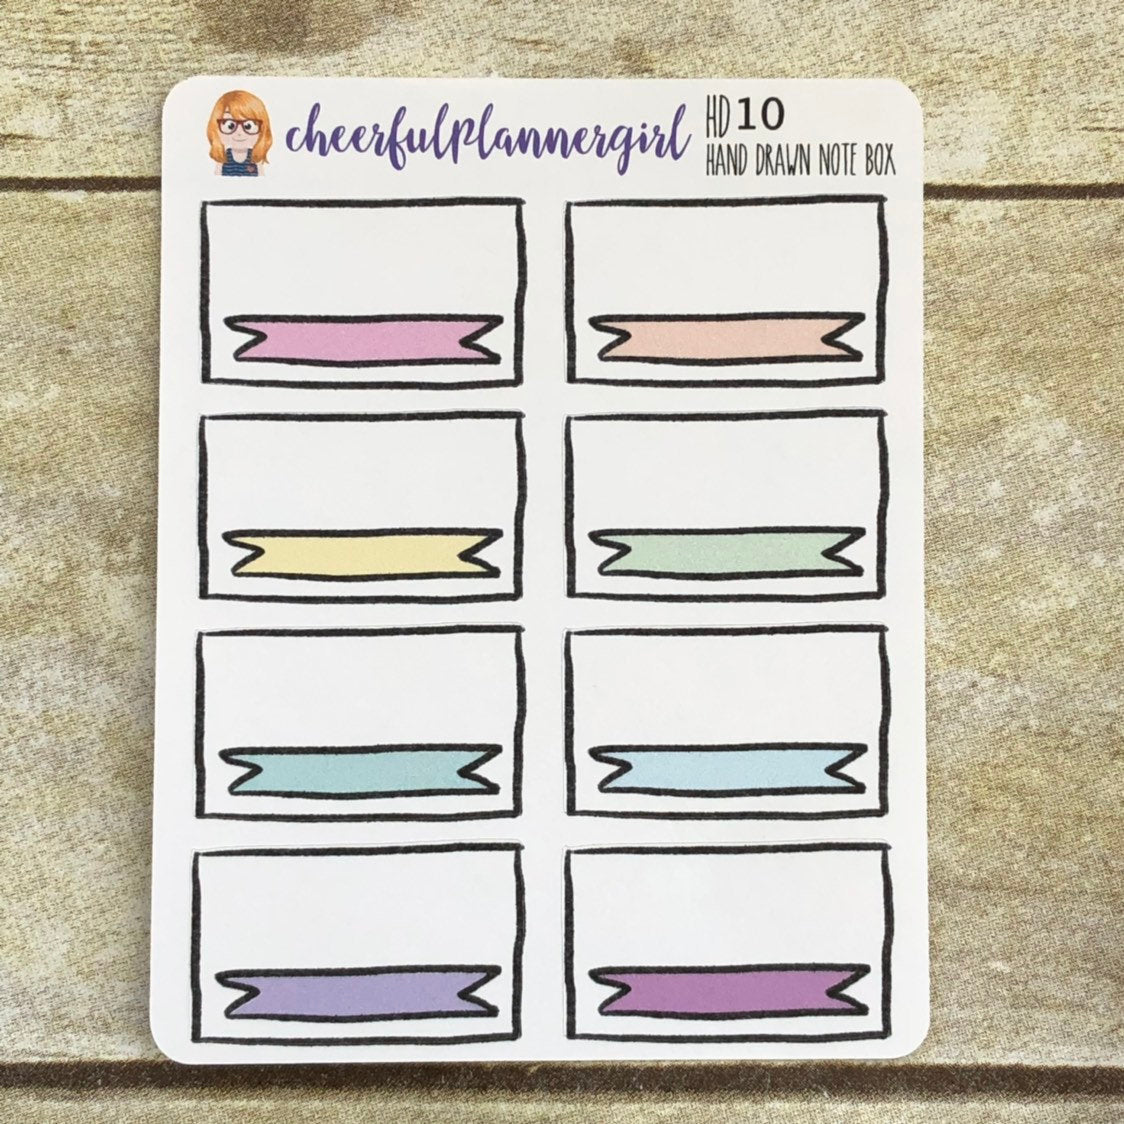 Hand Drawn Note Box Planner Stickers